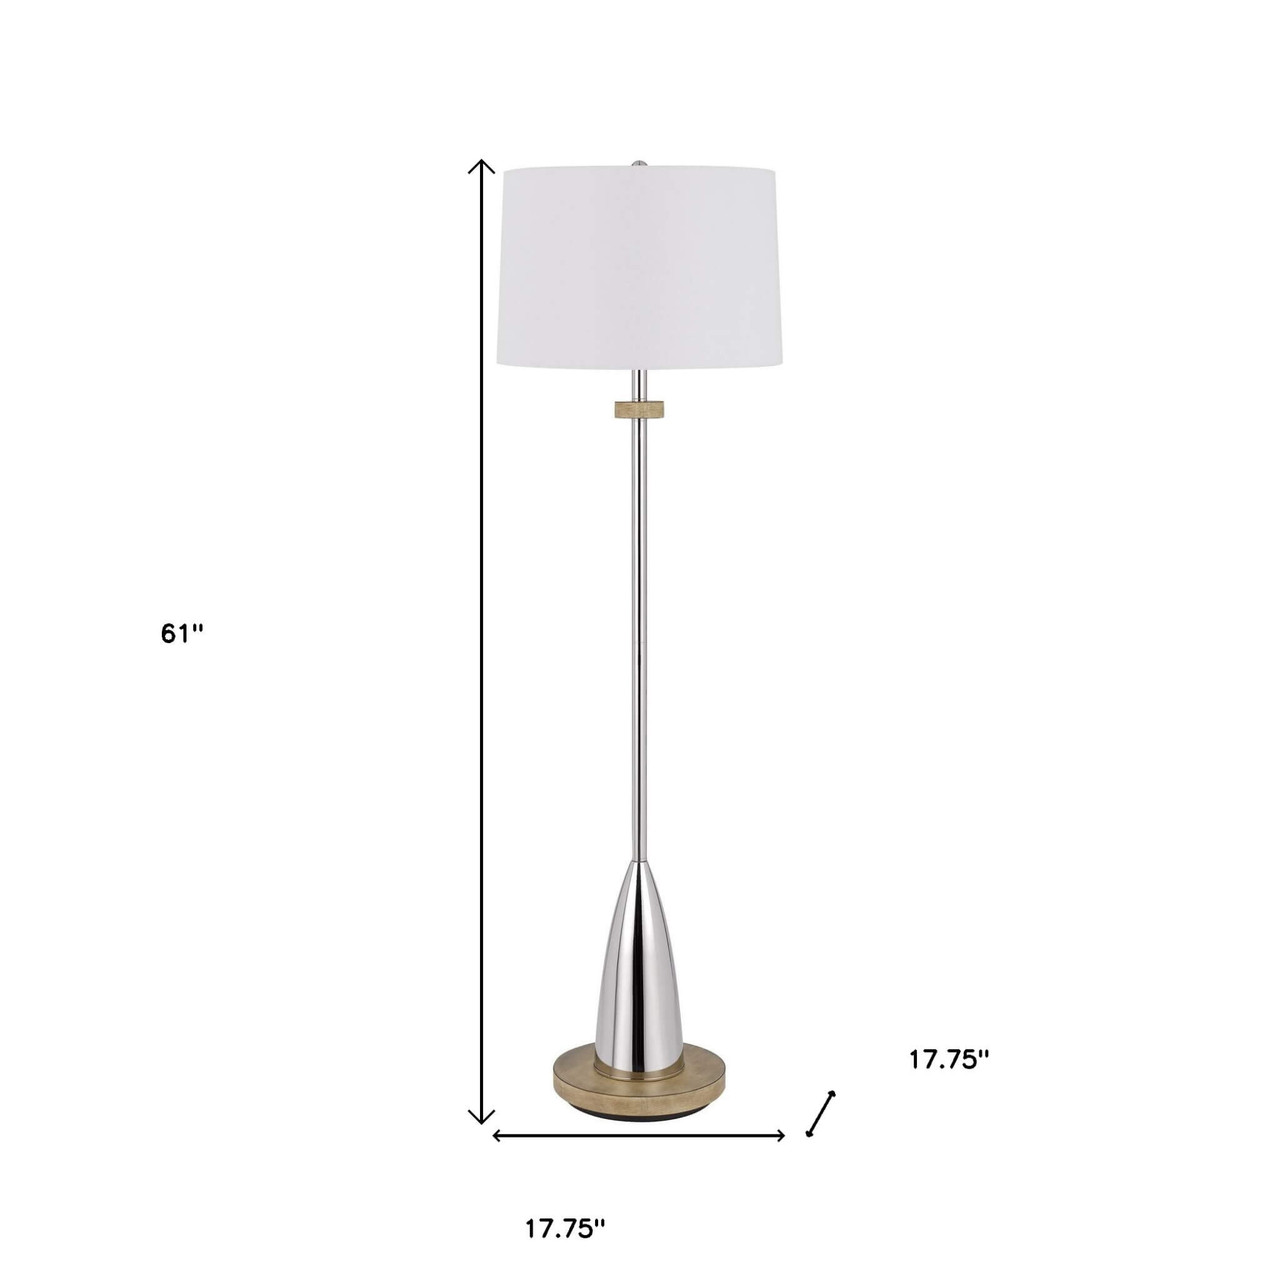 61" Chrome Traditional Shaped Floor Lamp With White Square Shade - Chicken Pieces